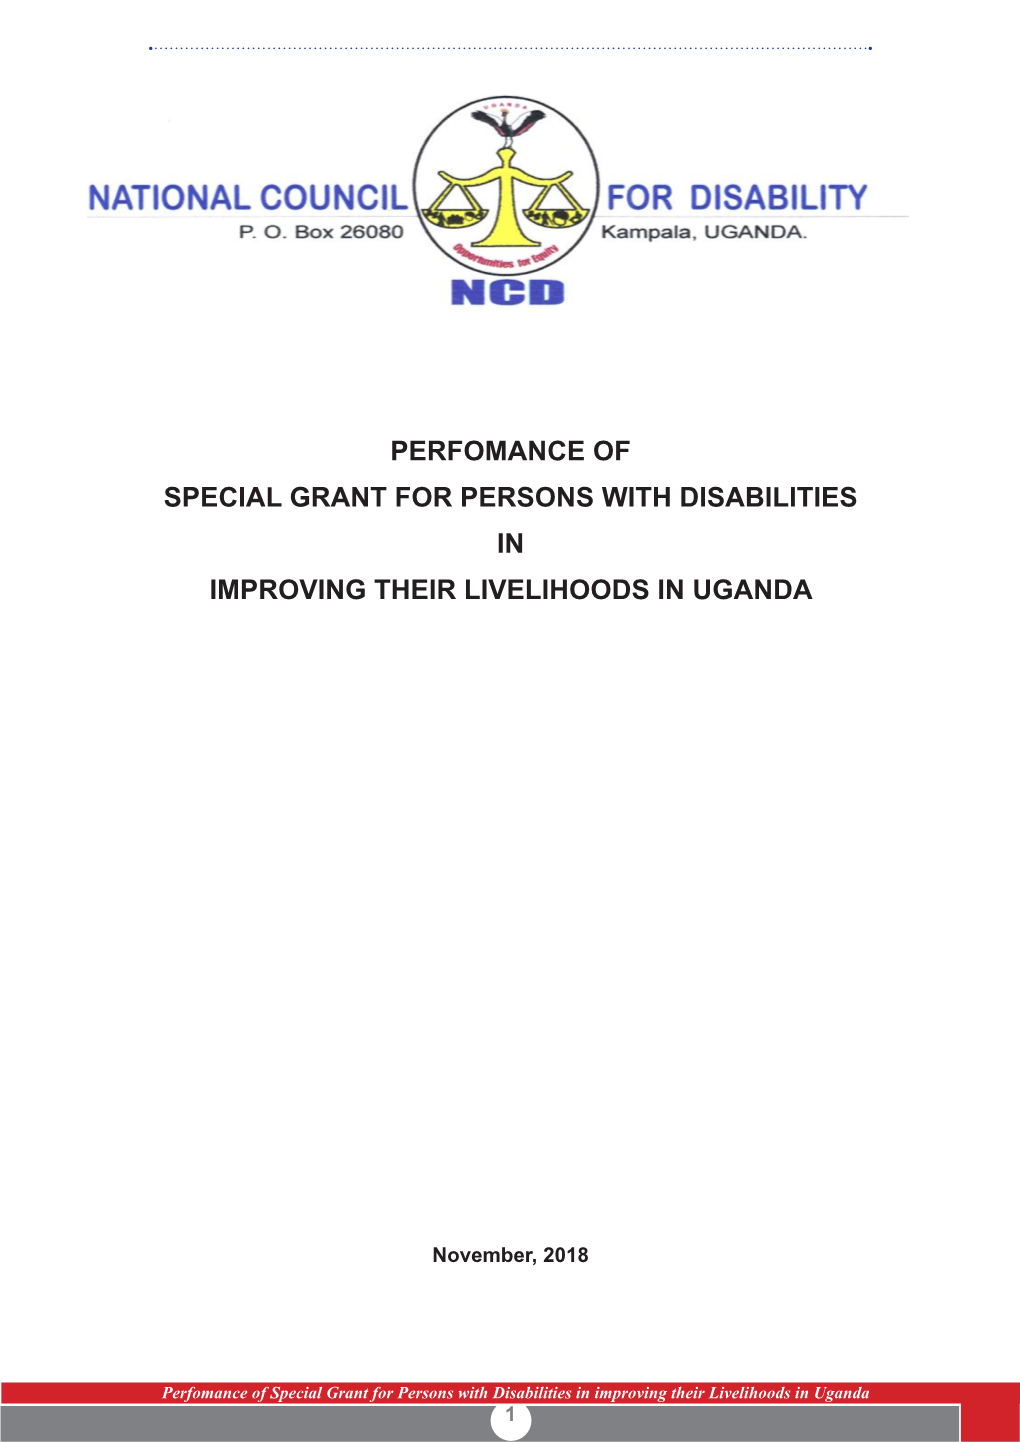 Perfomance of Special Grant for Persons with Disabilities in Improving Their Livelihoods in Uganda